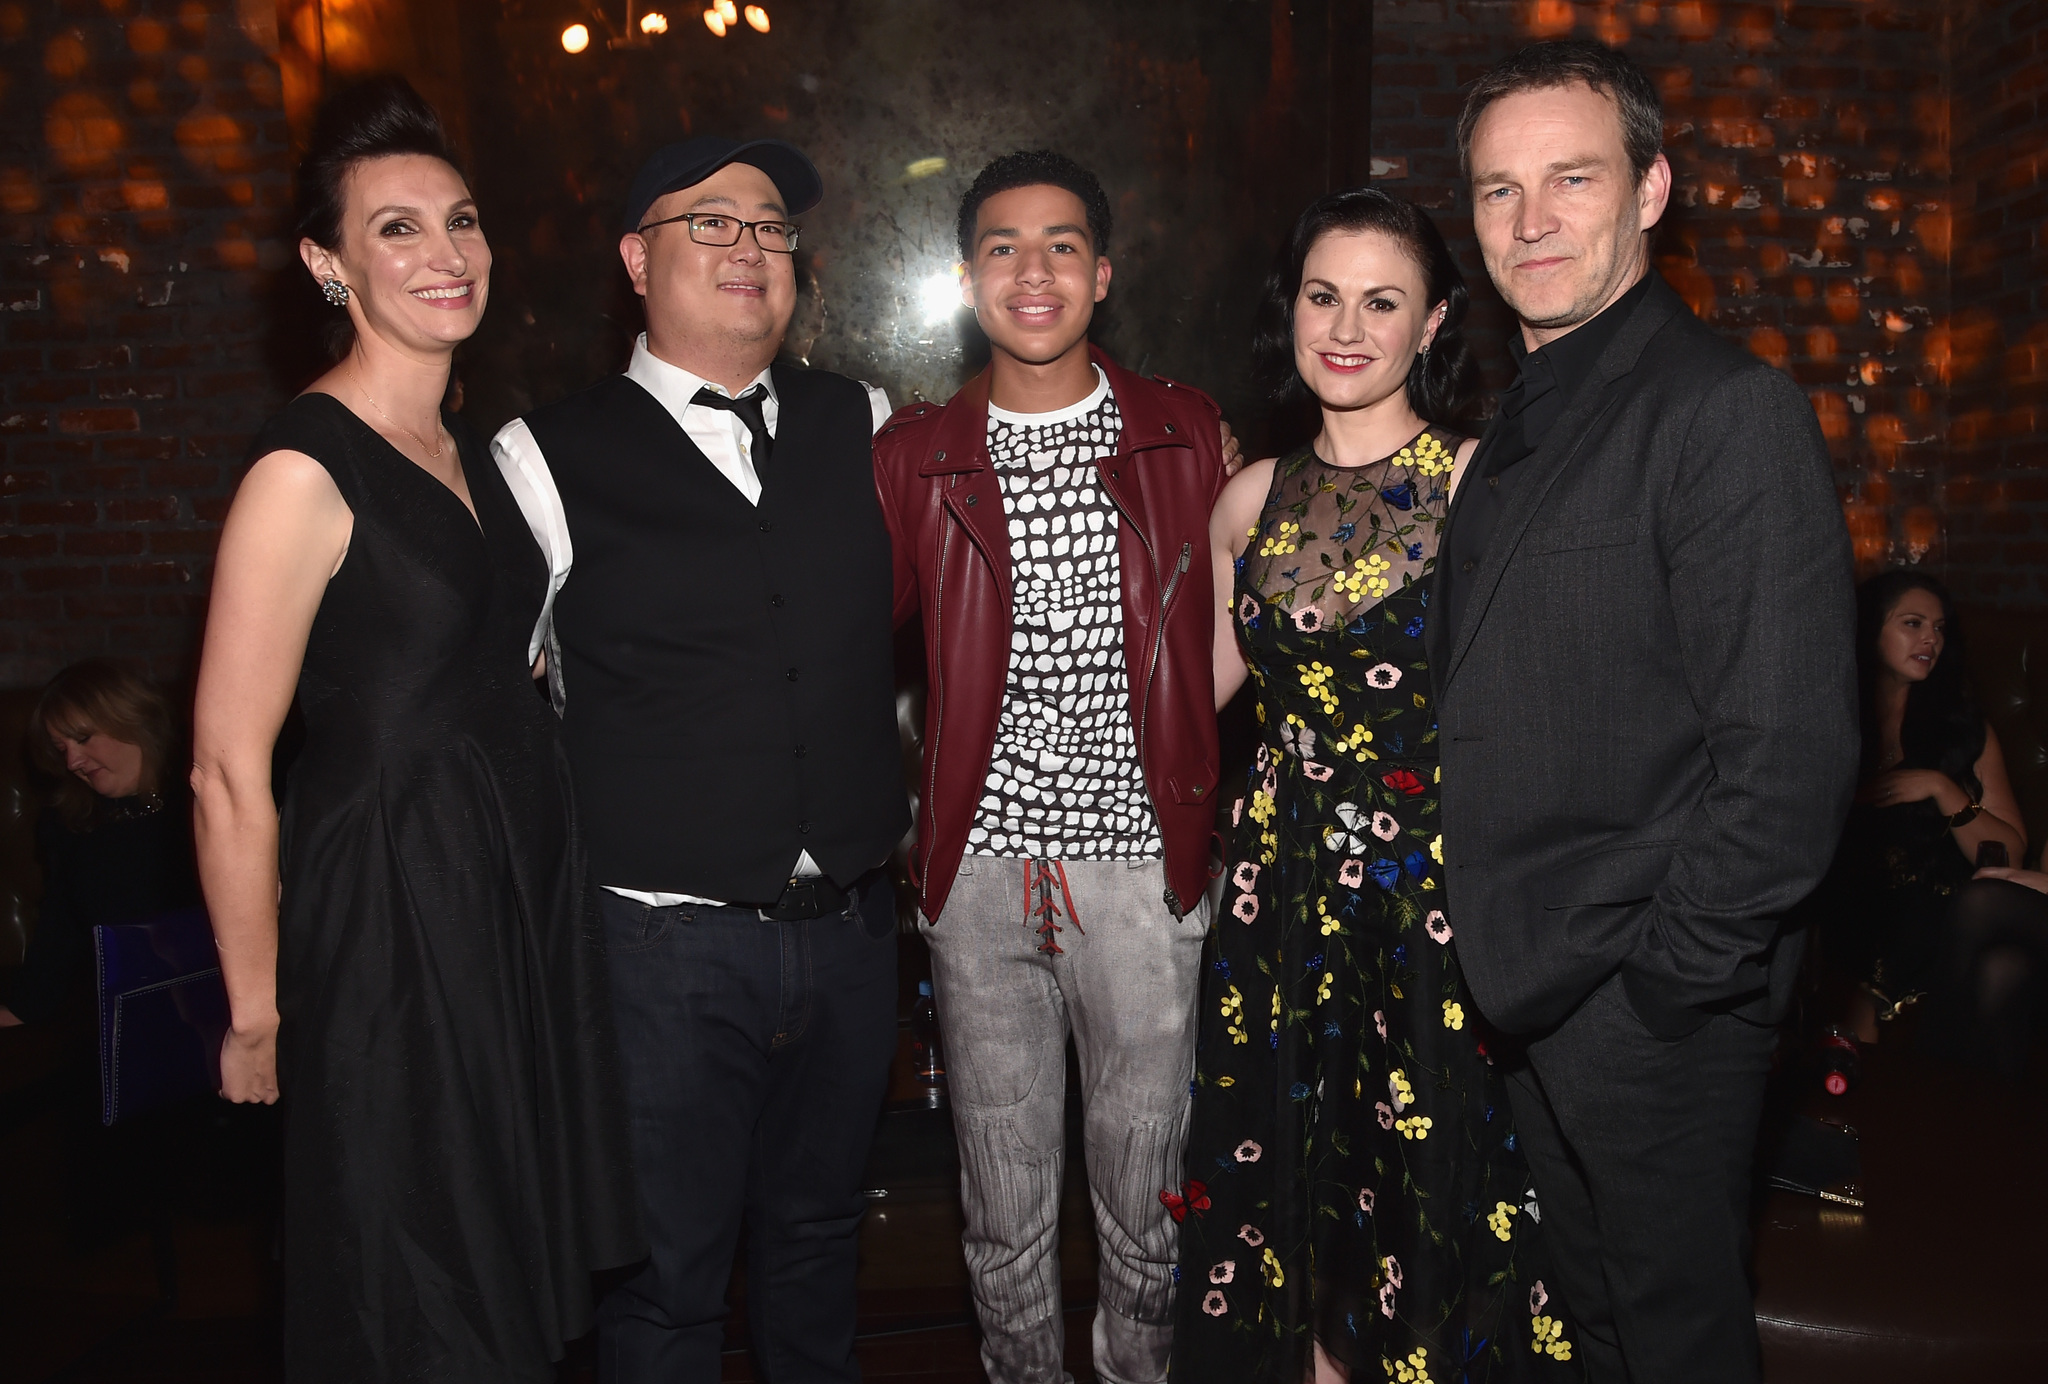 Anna Paquin, Stephen Moyer, Peter Sohn, Anna Chambers and Marcus Scribner at event of The Good Dinosaur (2015)